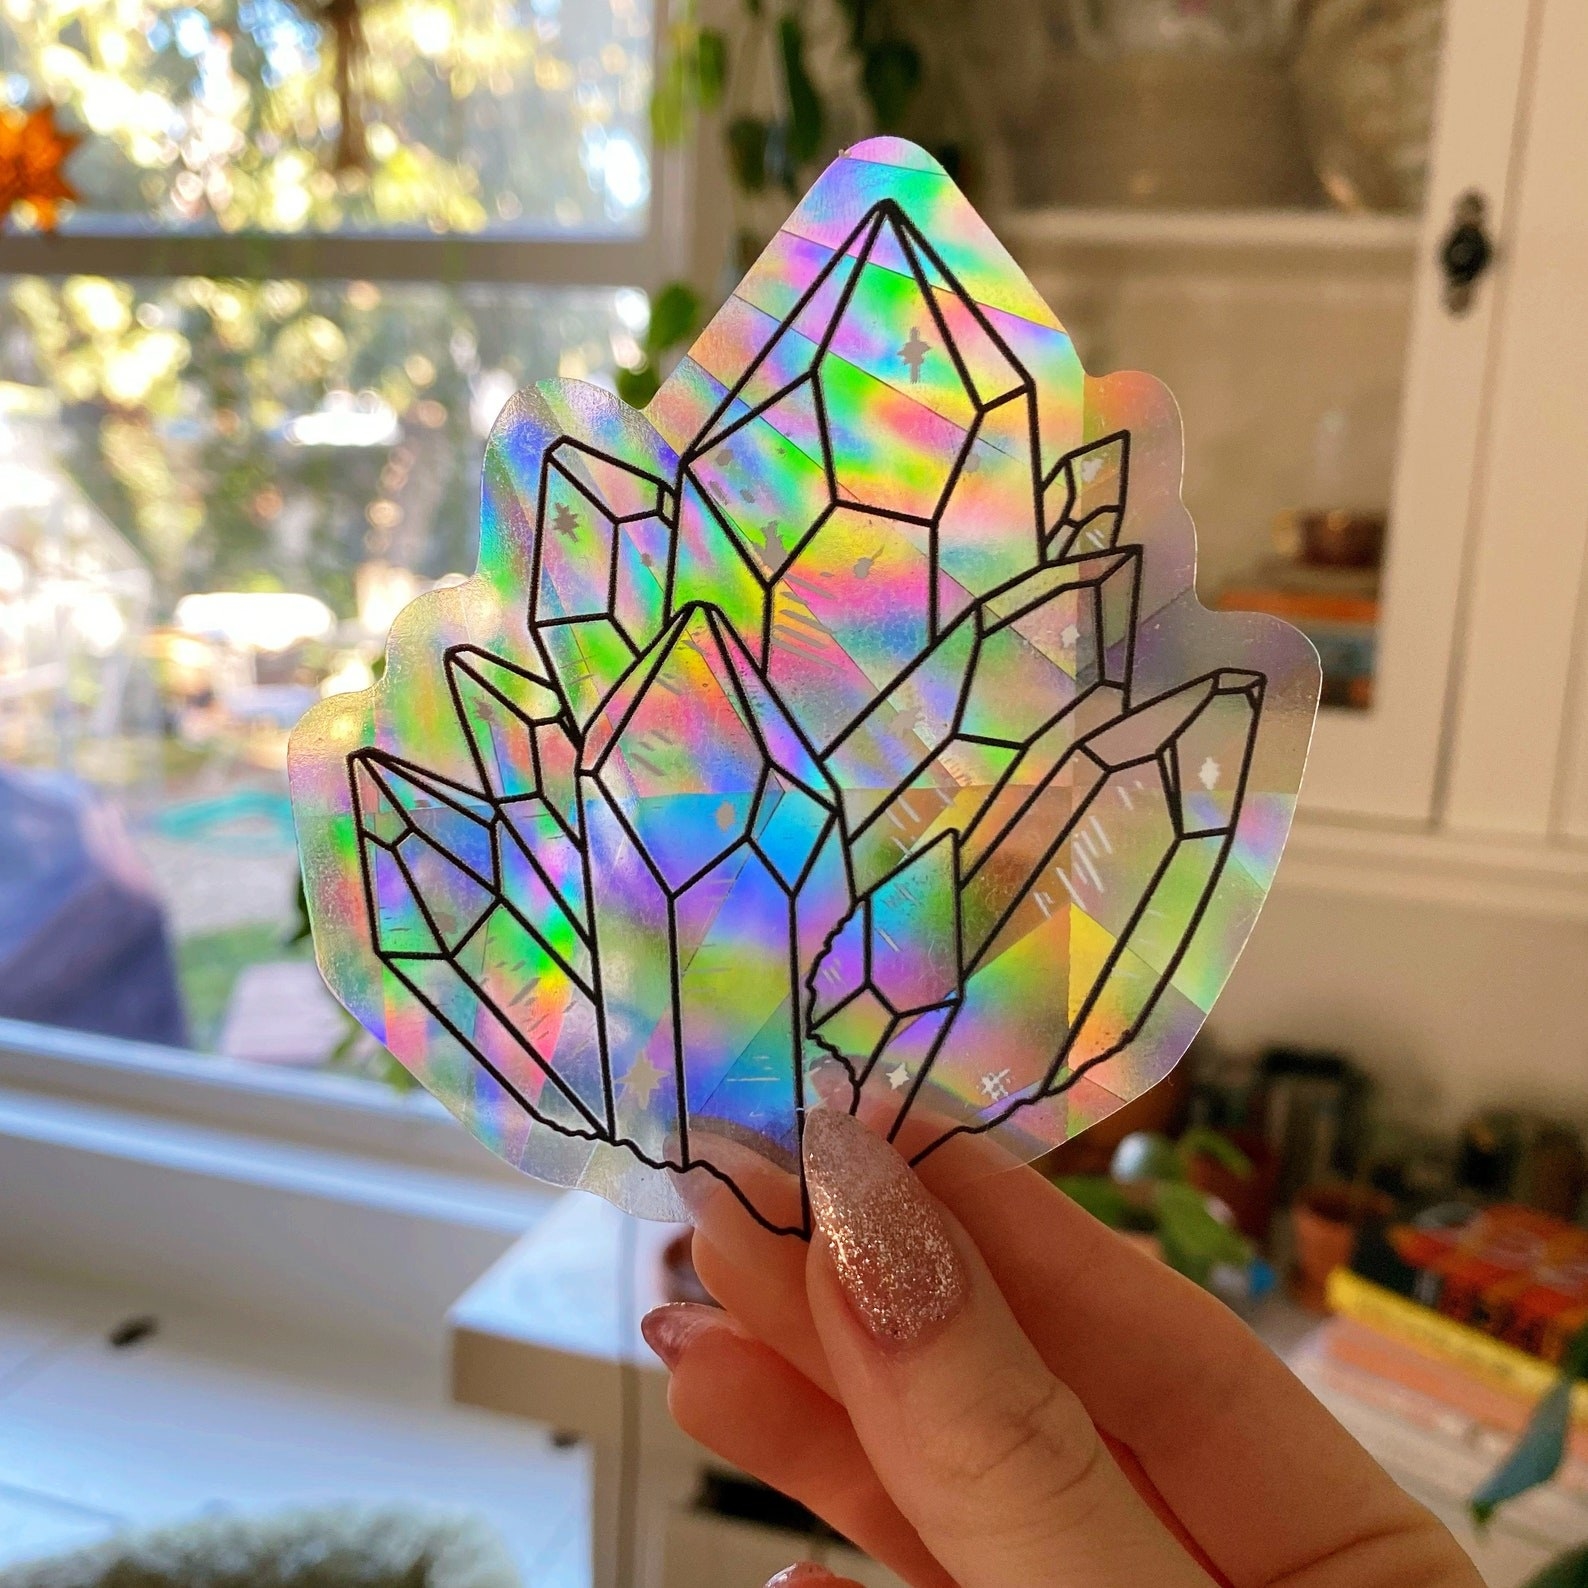 hand holds up gem-shaped shimmery sticker that&#x27;s casting off rainbows in room